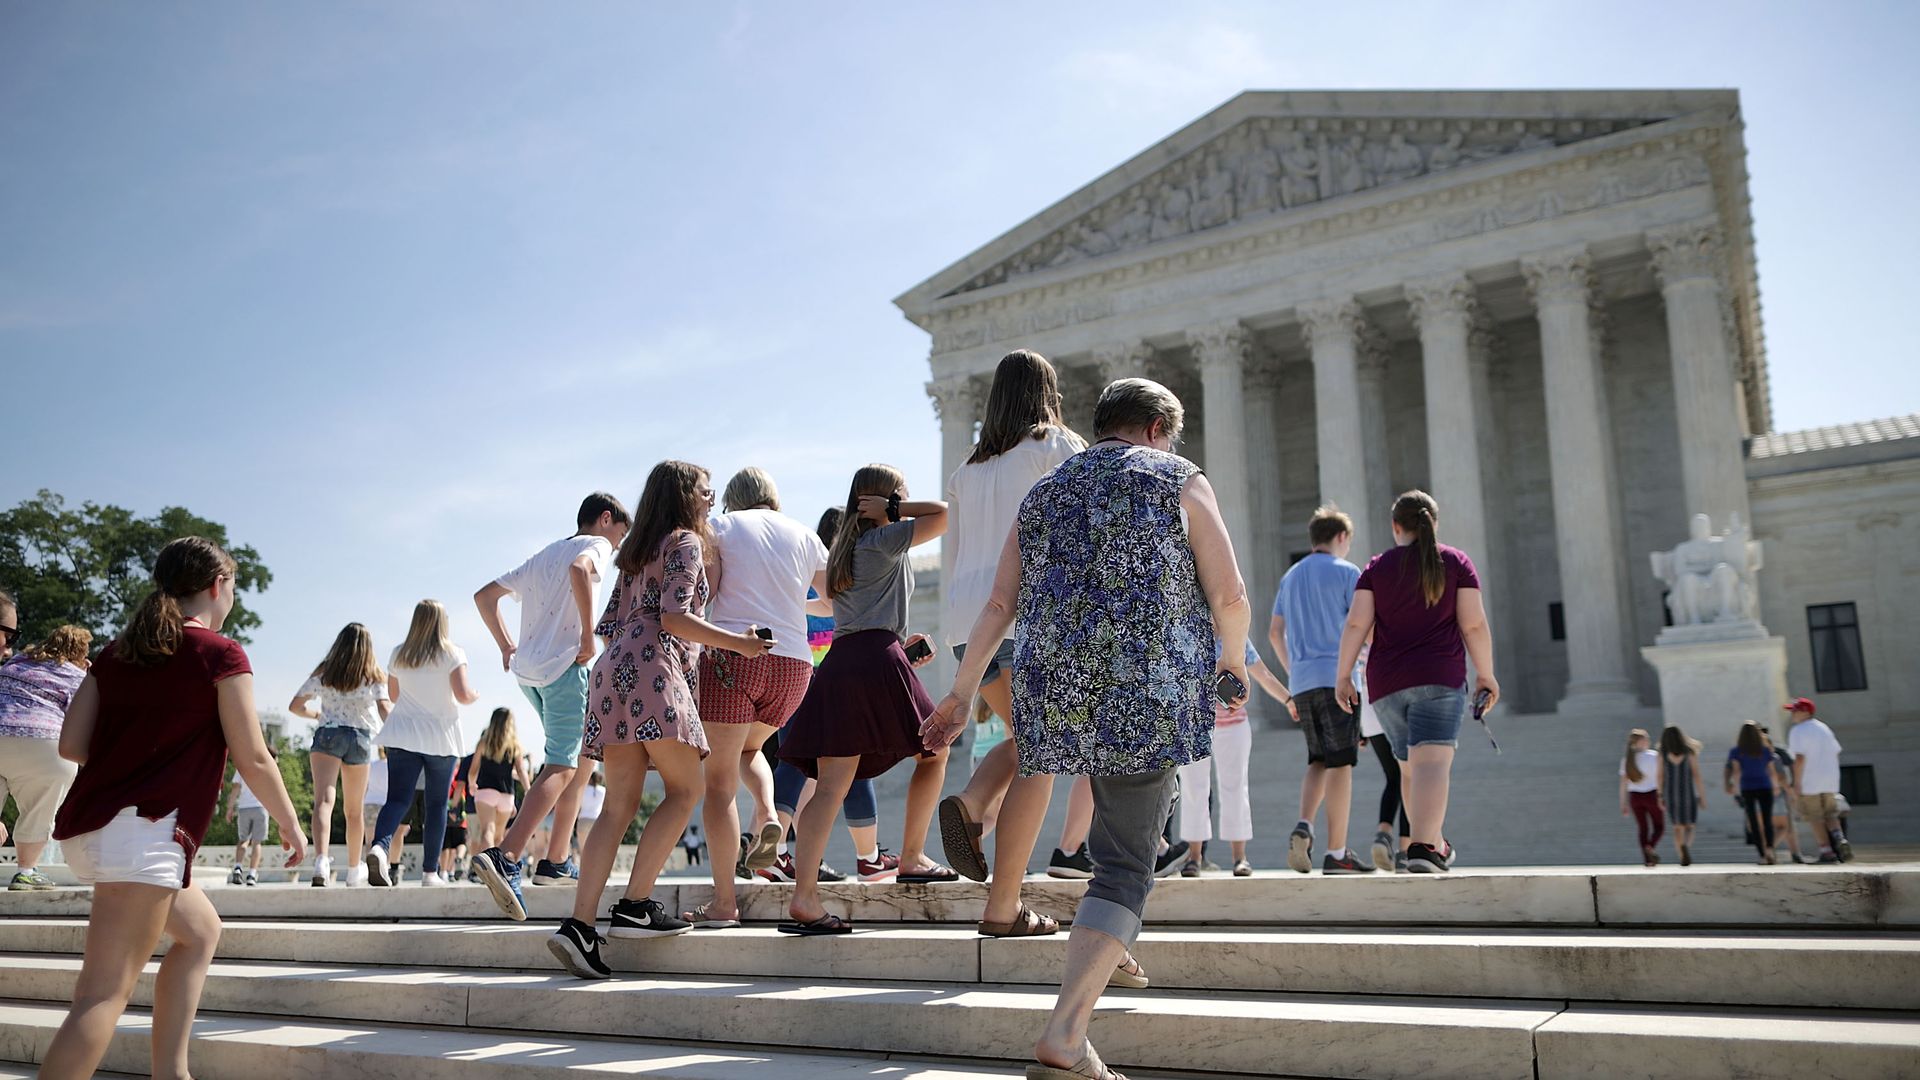 People walking in front of the Supreme Court